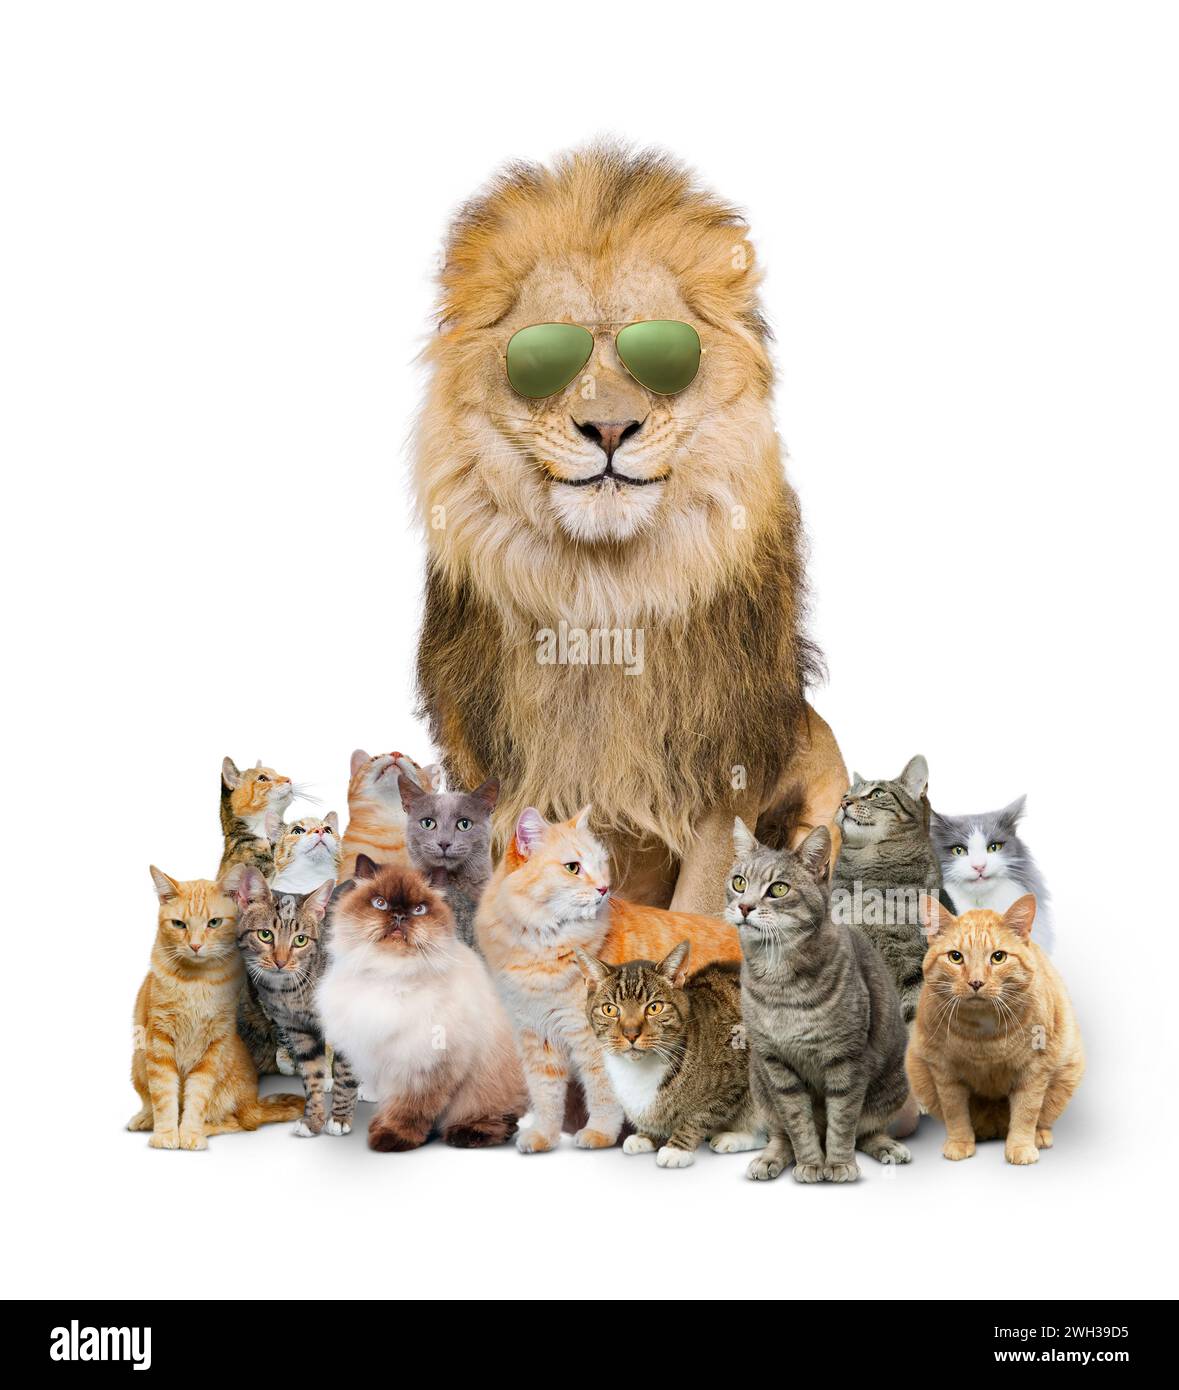 Big cool cat: A lion wears aviator sunglasses and sits among a clowder, or group, of domestic cats in a funny image about standing out from the crowd. Stock Photo